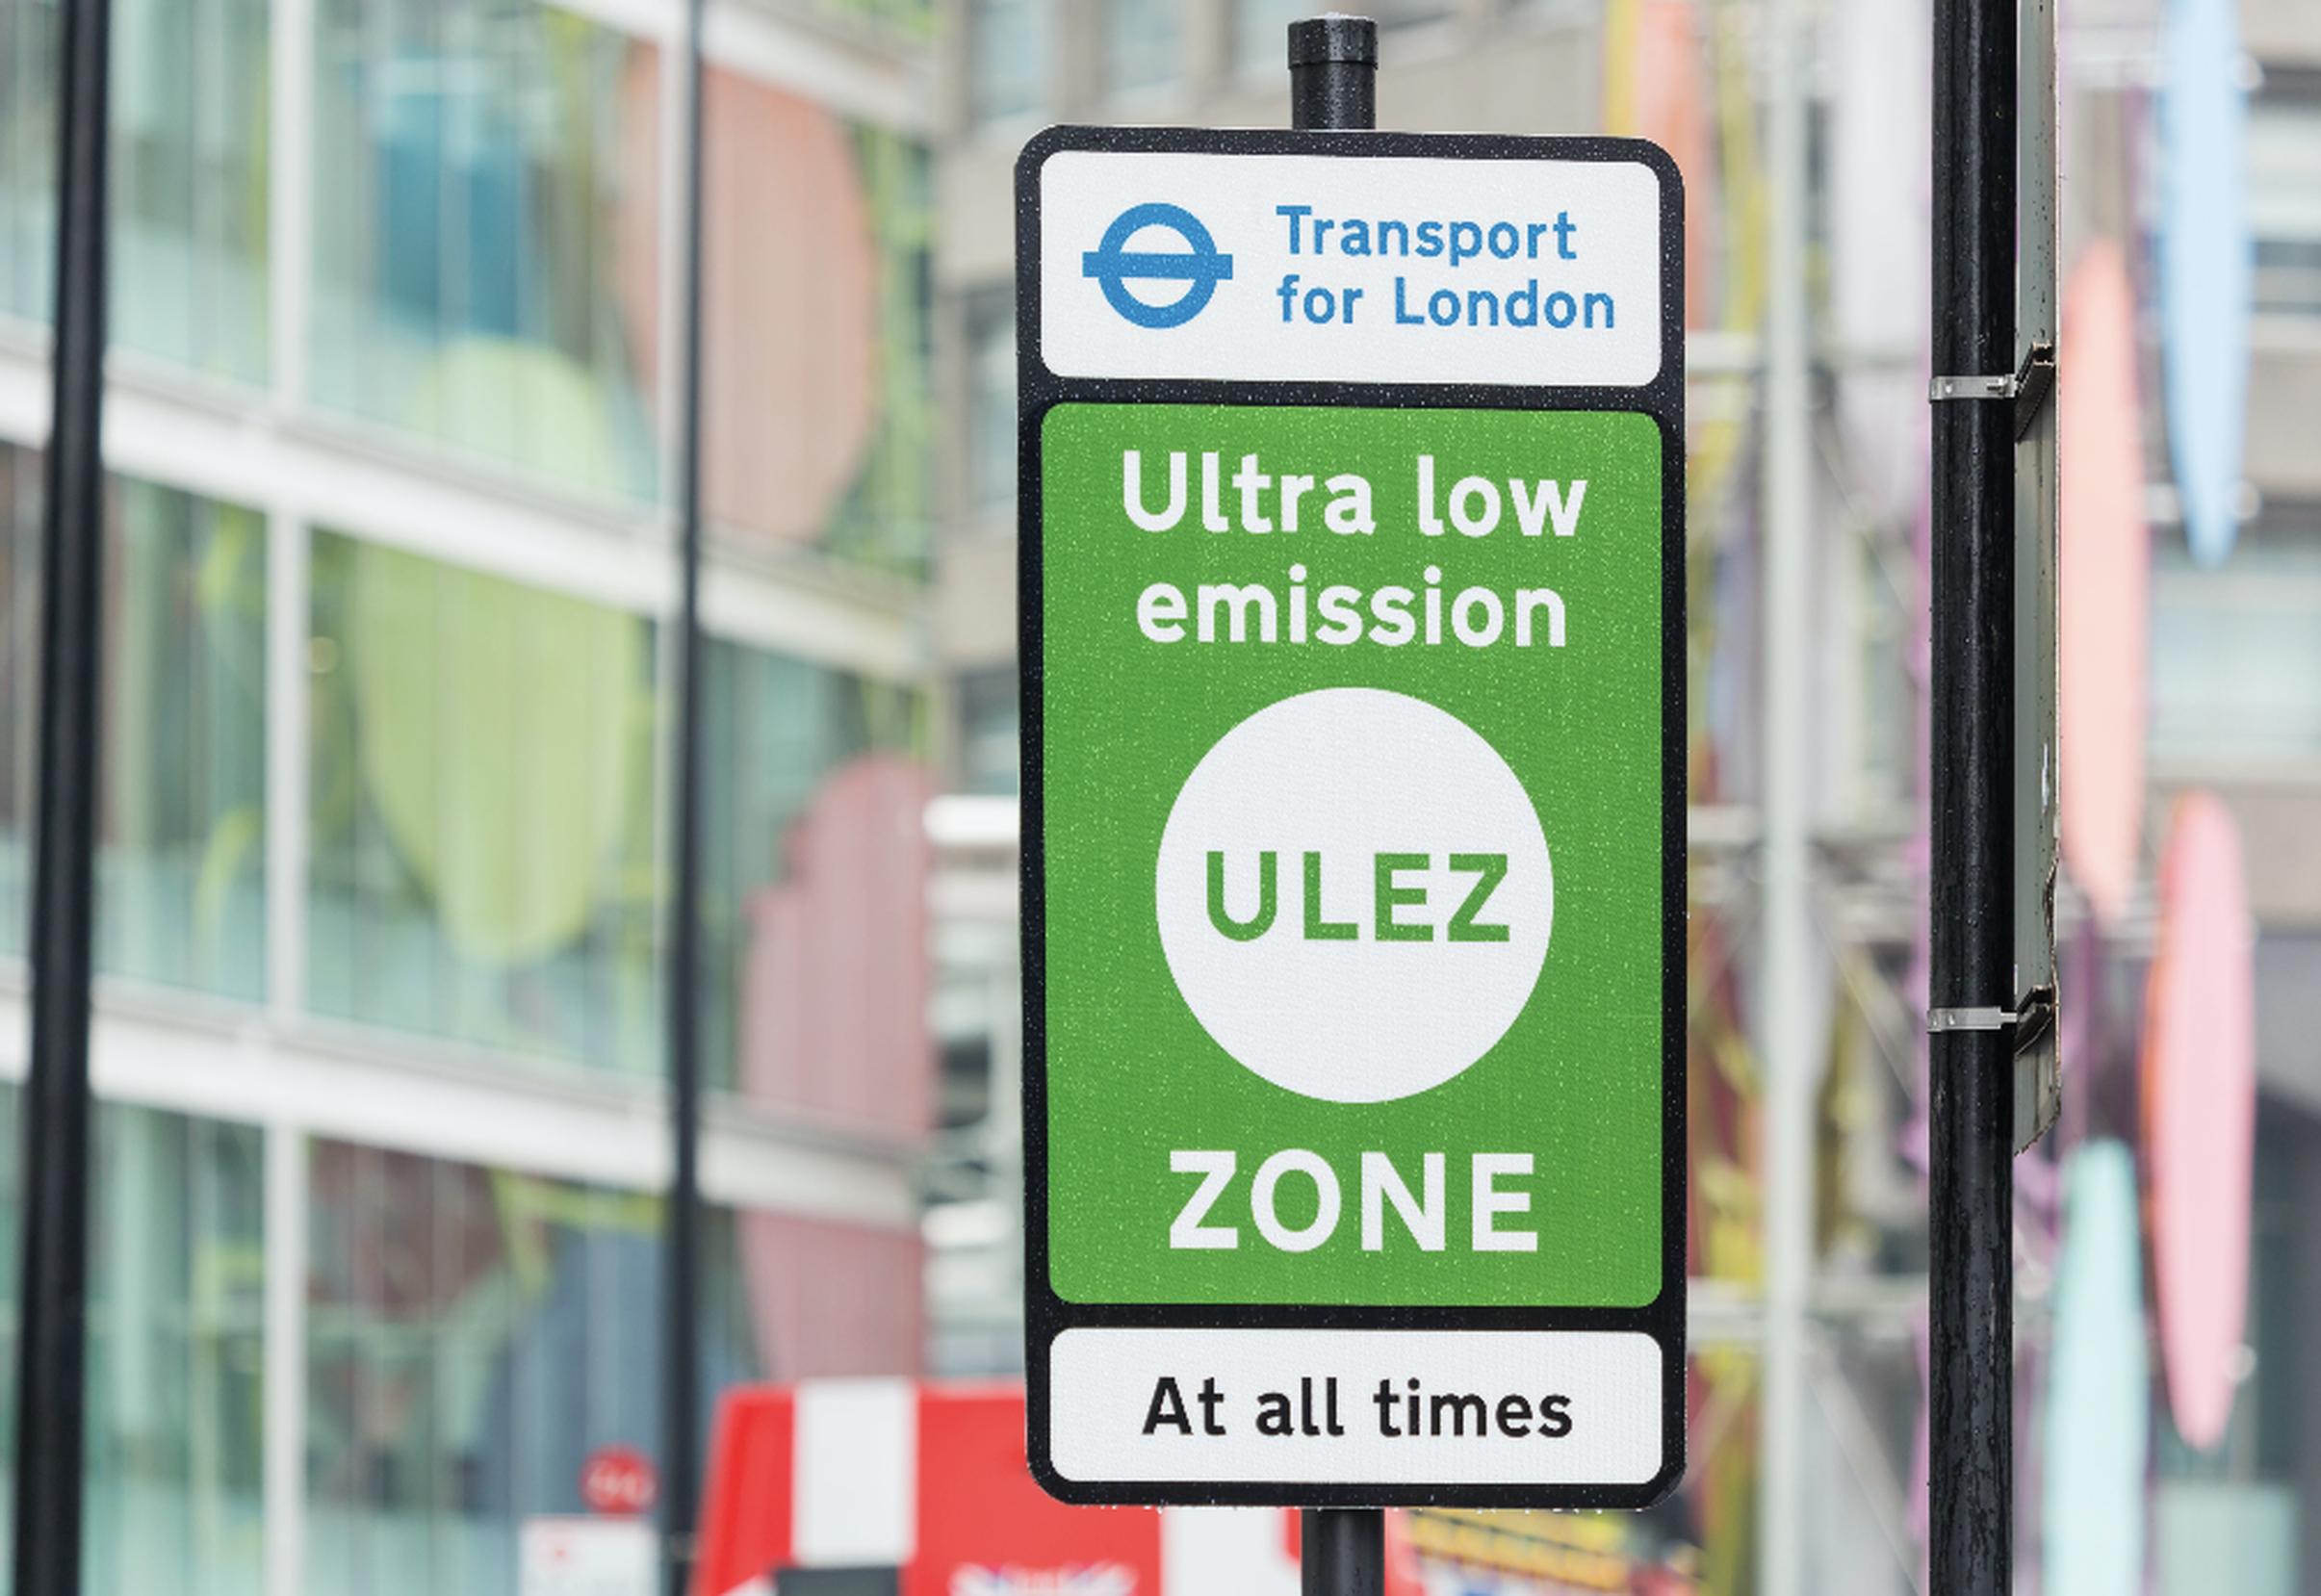 The ULEZ operates 24/7 (except for Christmas Day)